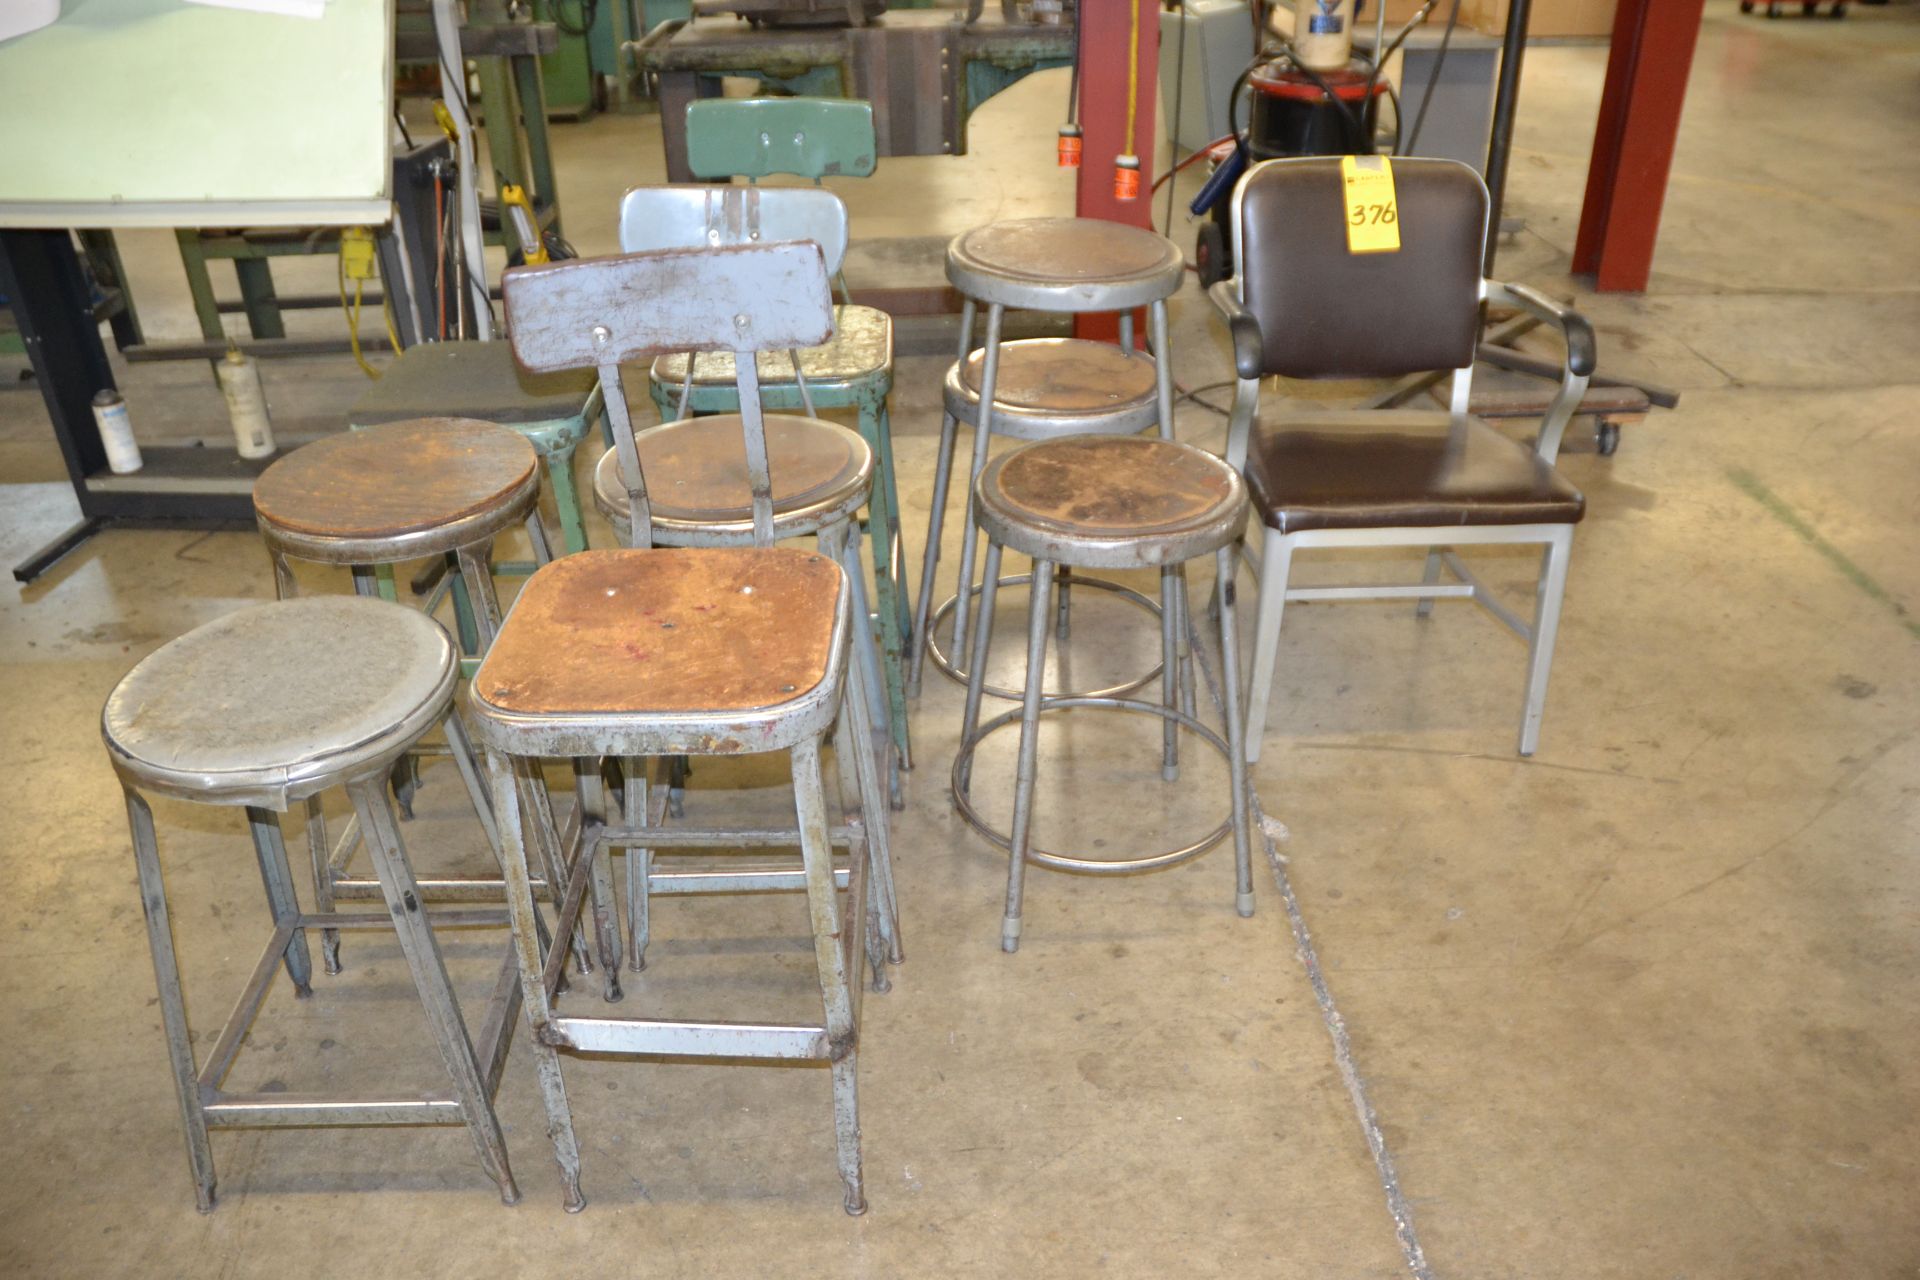 LOT - SHOP STOOLS / CHAIRS